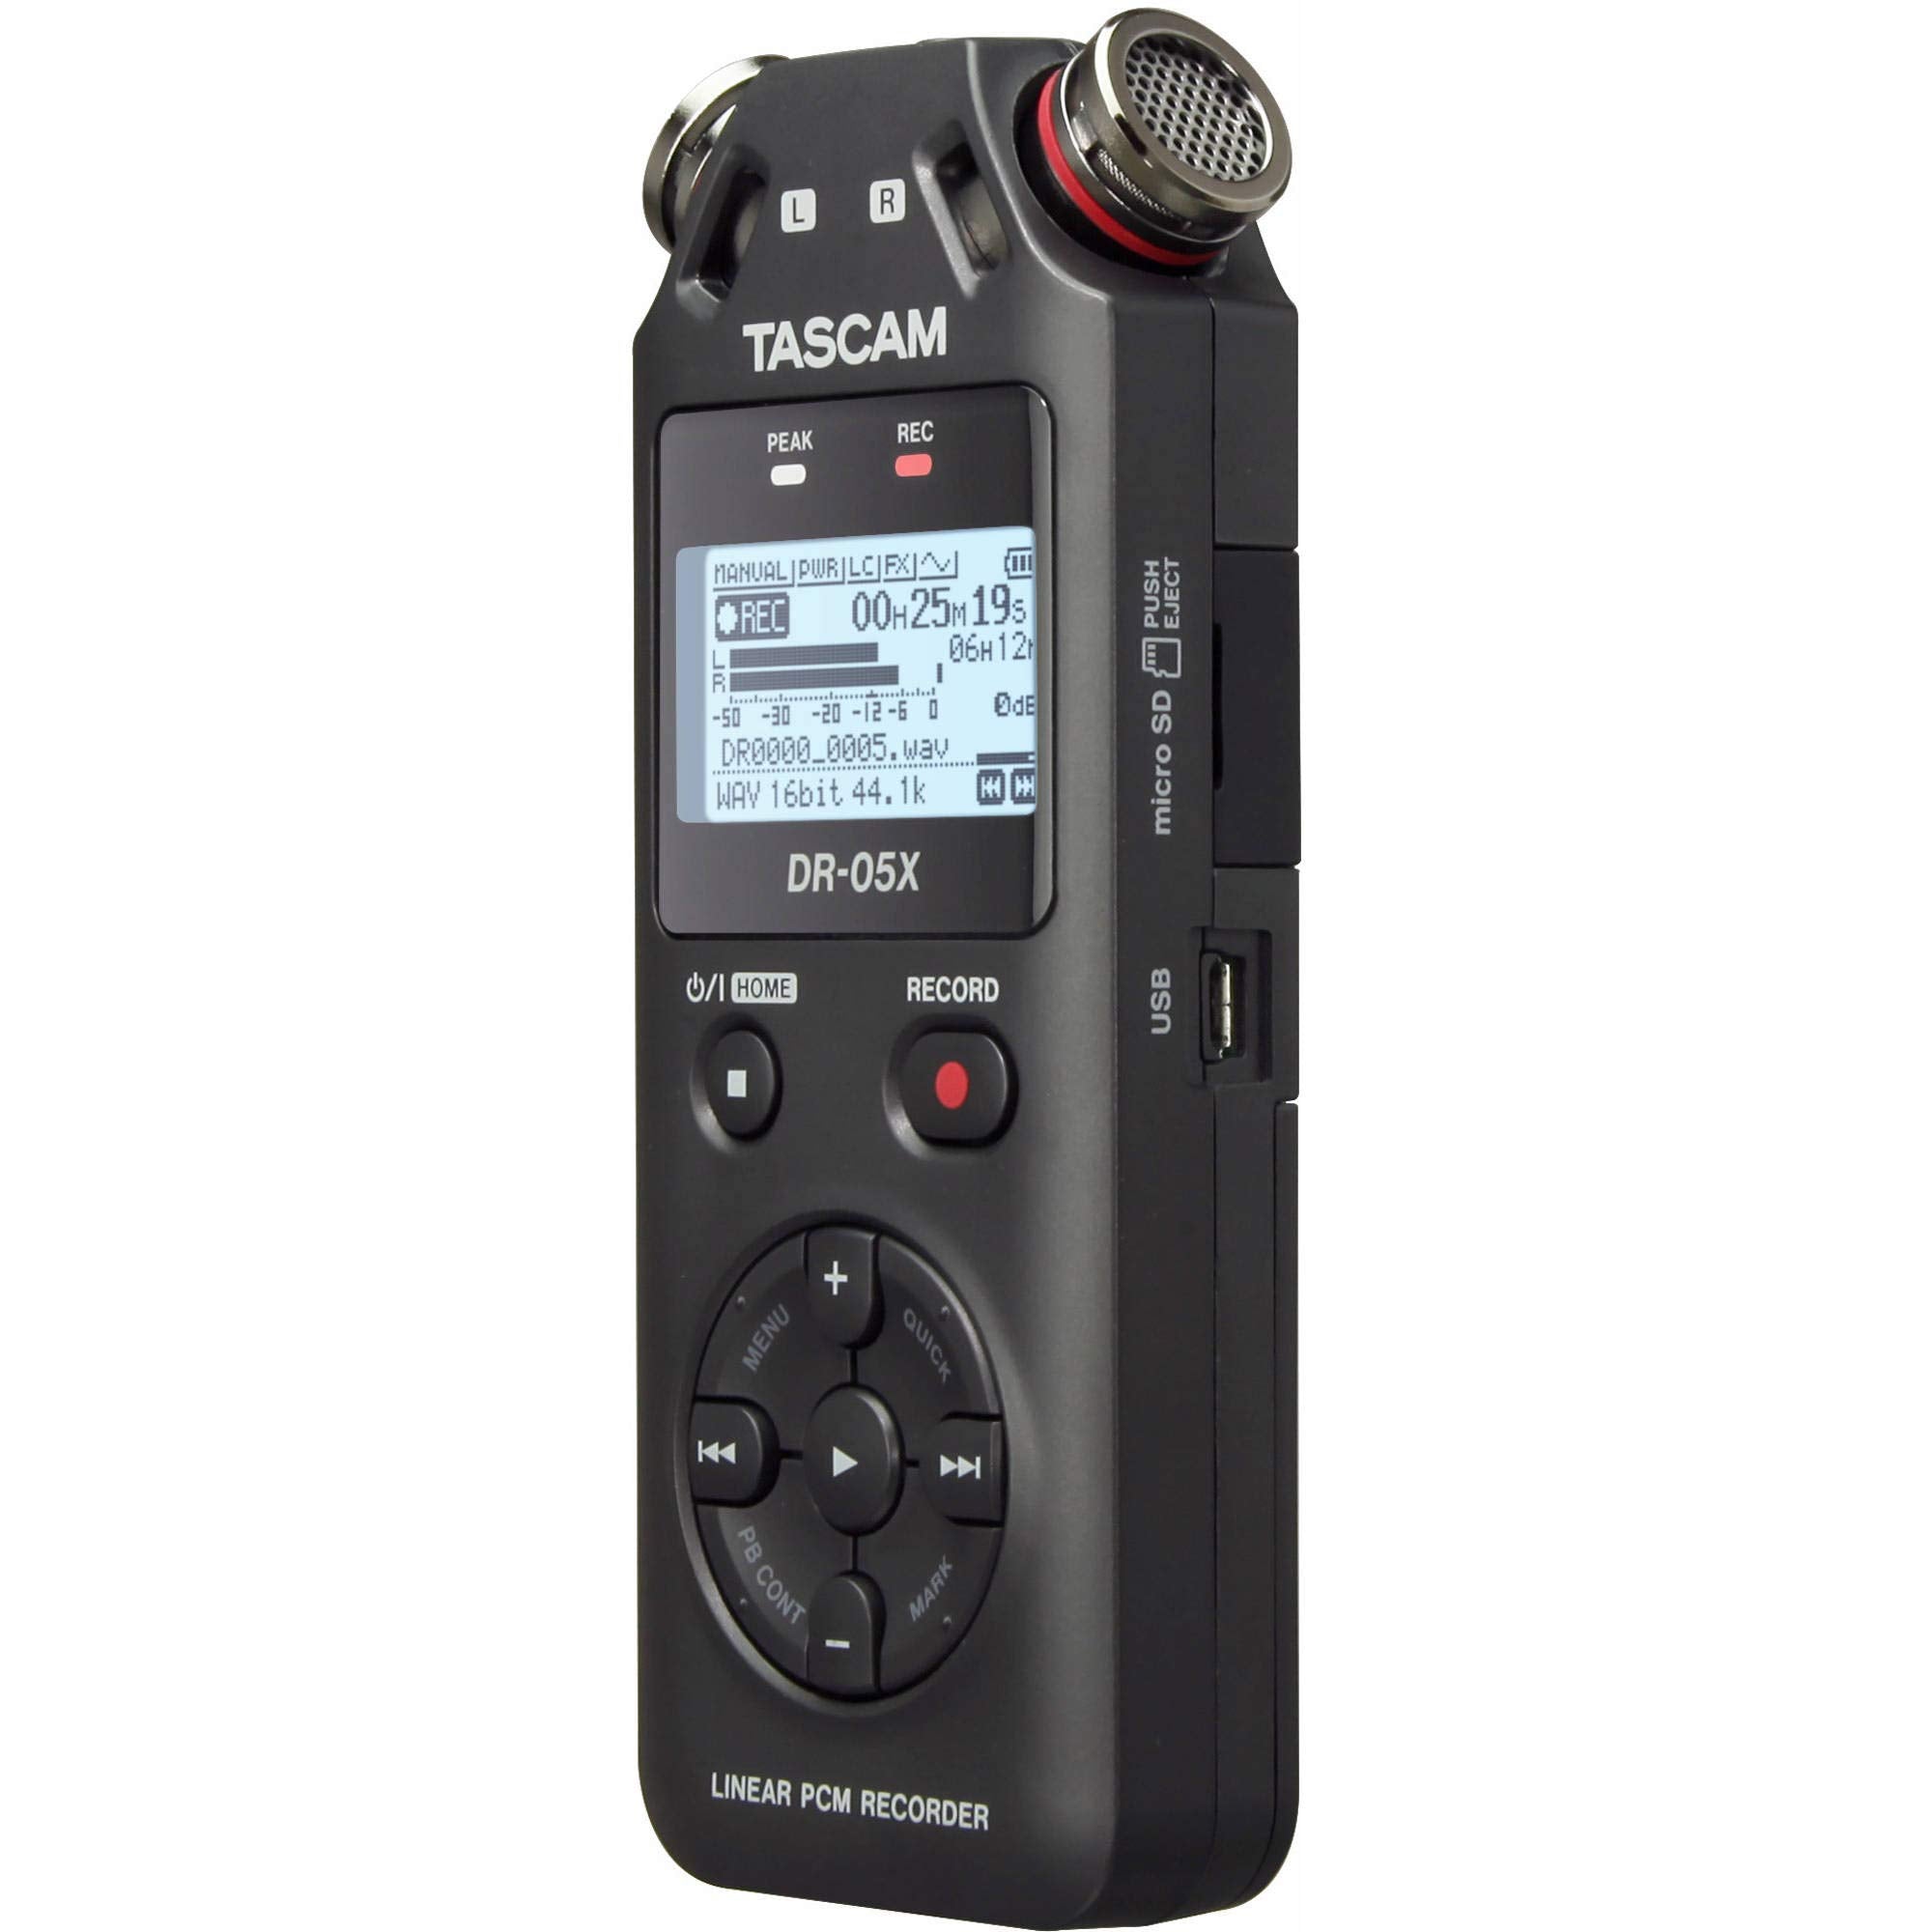 Tascam DR-05X Stereo Handheld Digital Audio Recorder & USB Interface Bundle with Movo"Deadcat" Windscreen and 32GB Micro SD Card (Latest Version)  - Like New